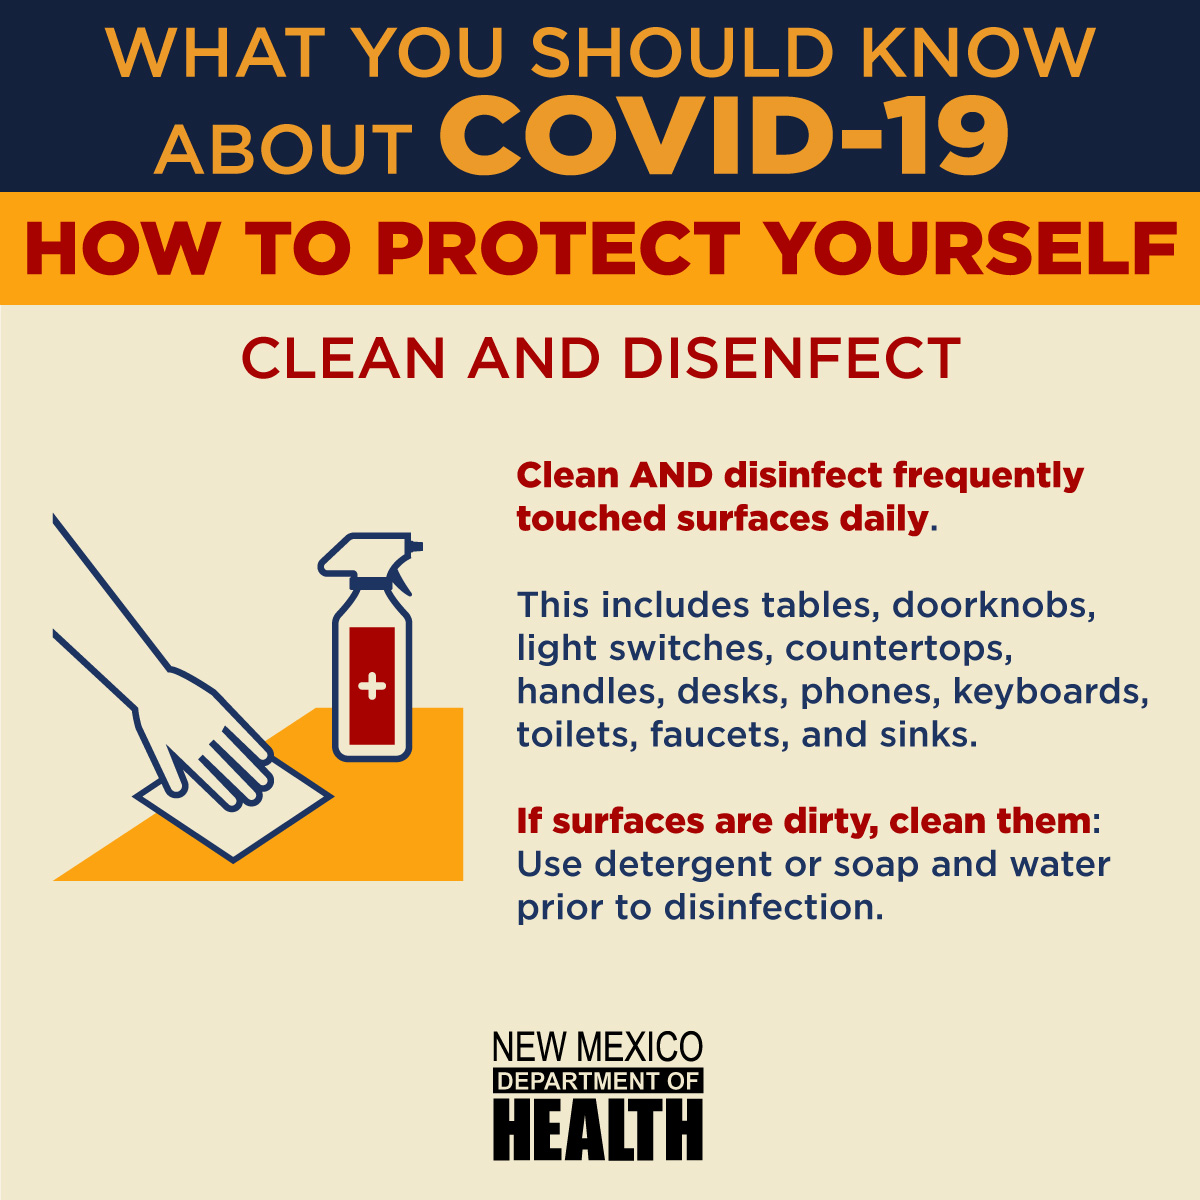 NM Dept. of Health on Twitter: "Stay home and remember to